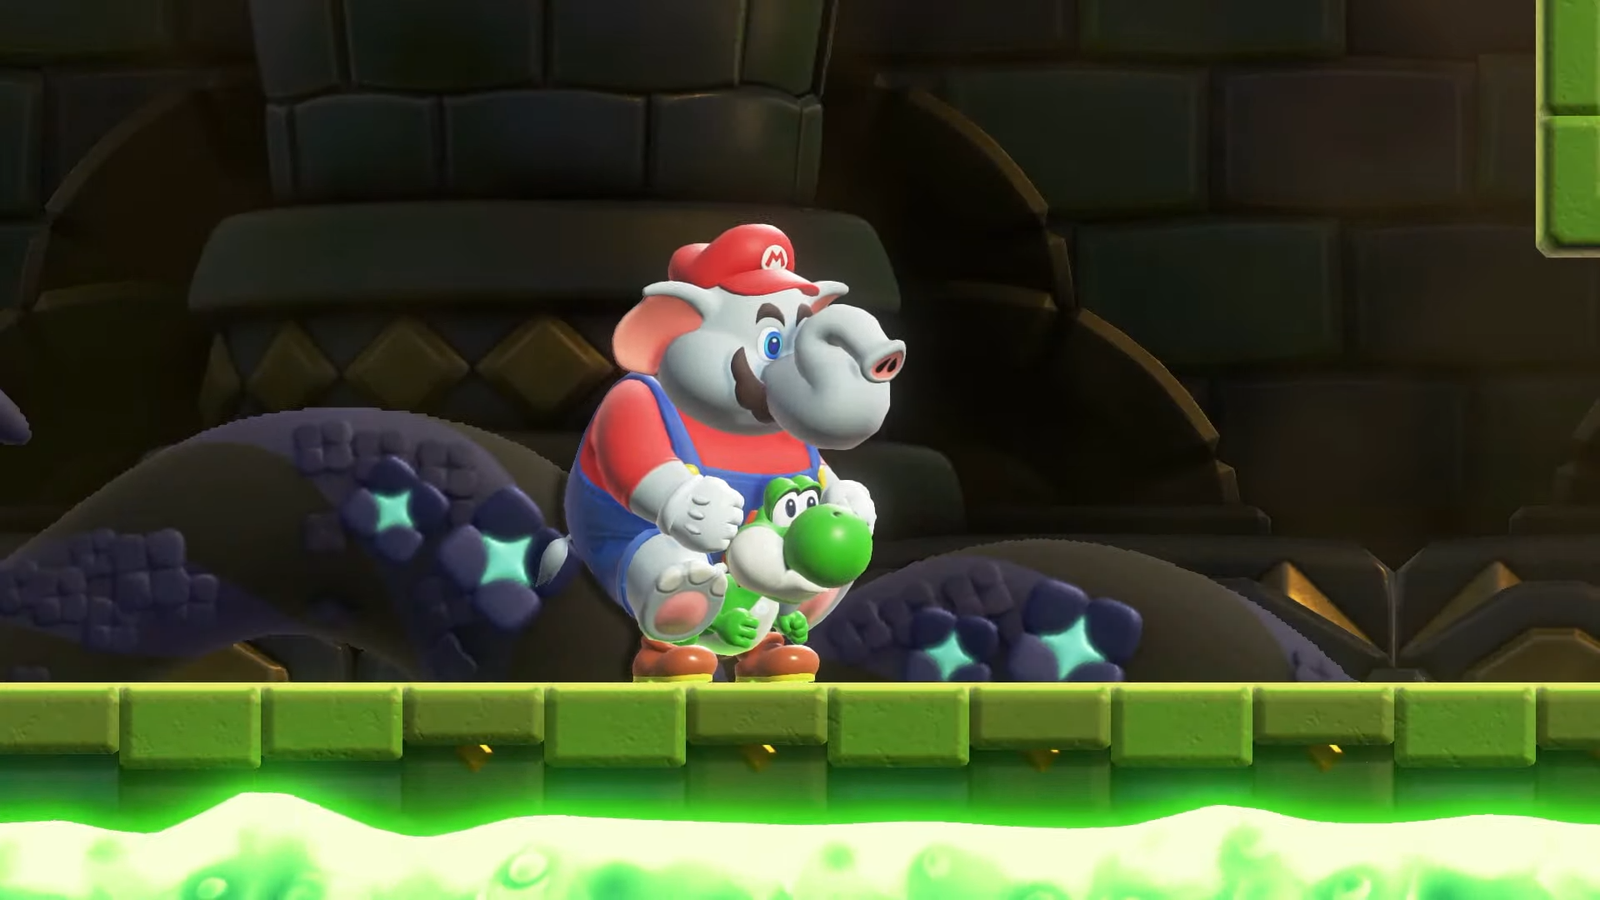 The Internet Is Really Amused By Elephant Mario Crushing a Poor Yoshi in Super Mario Bros. Wonder